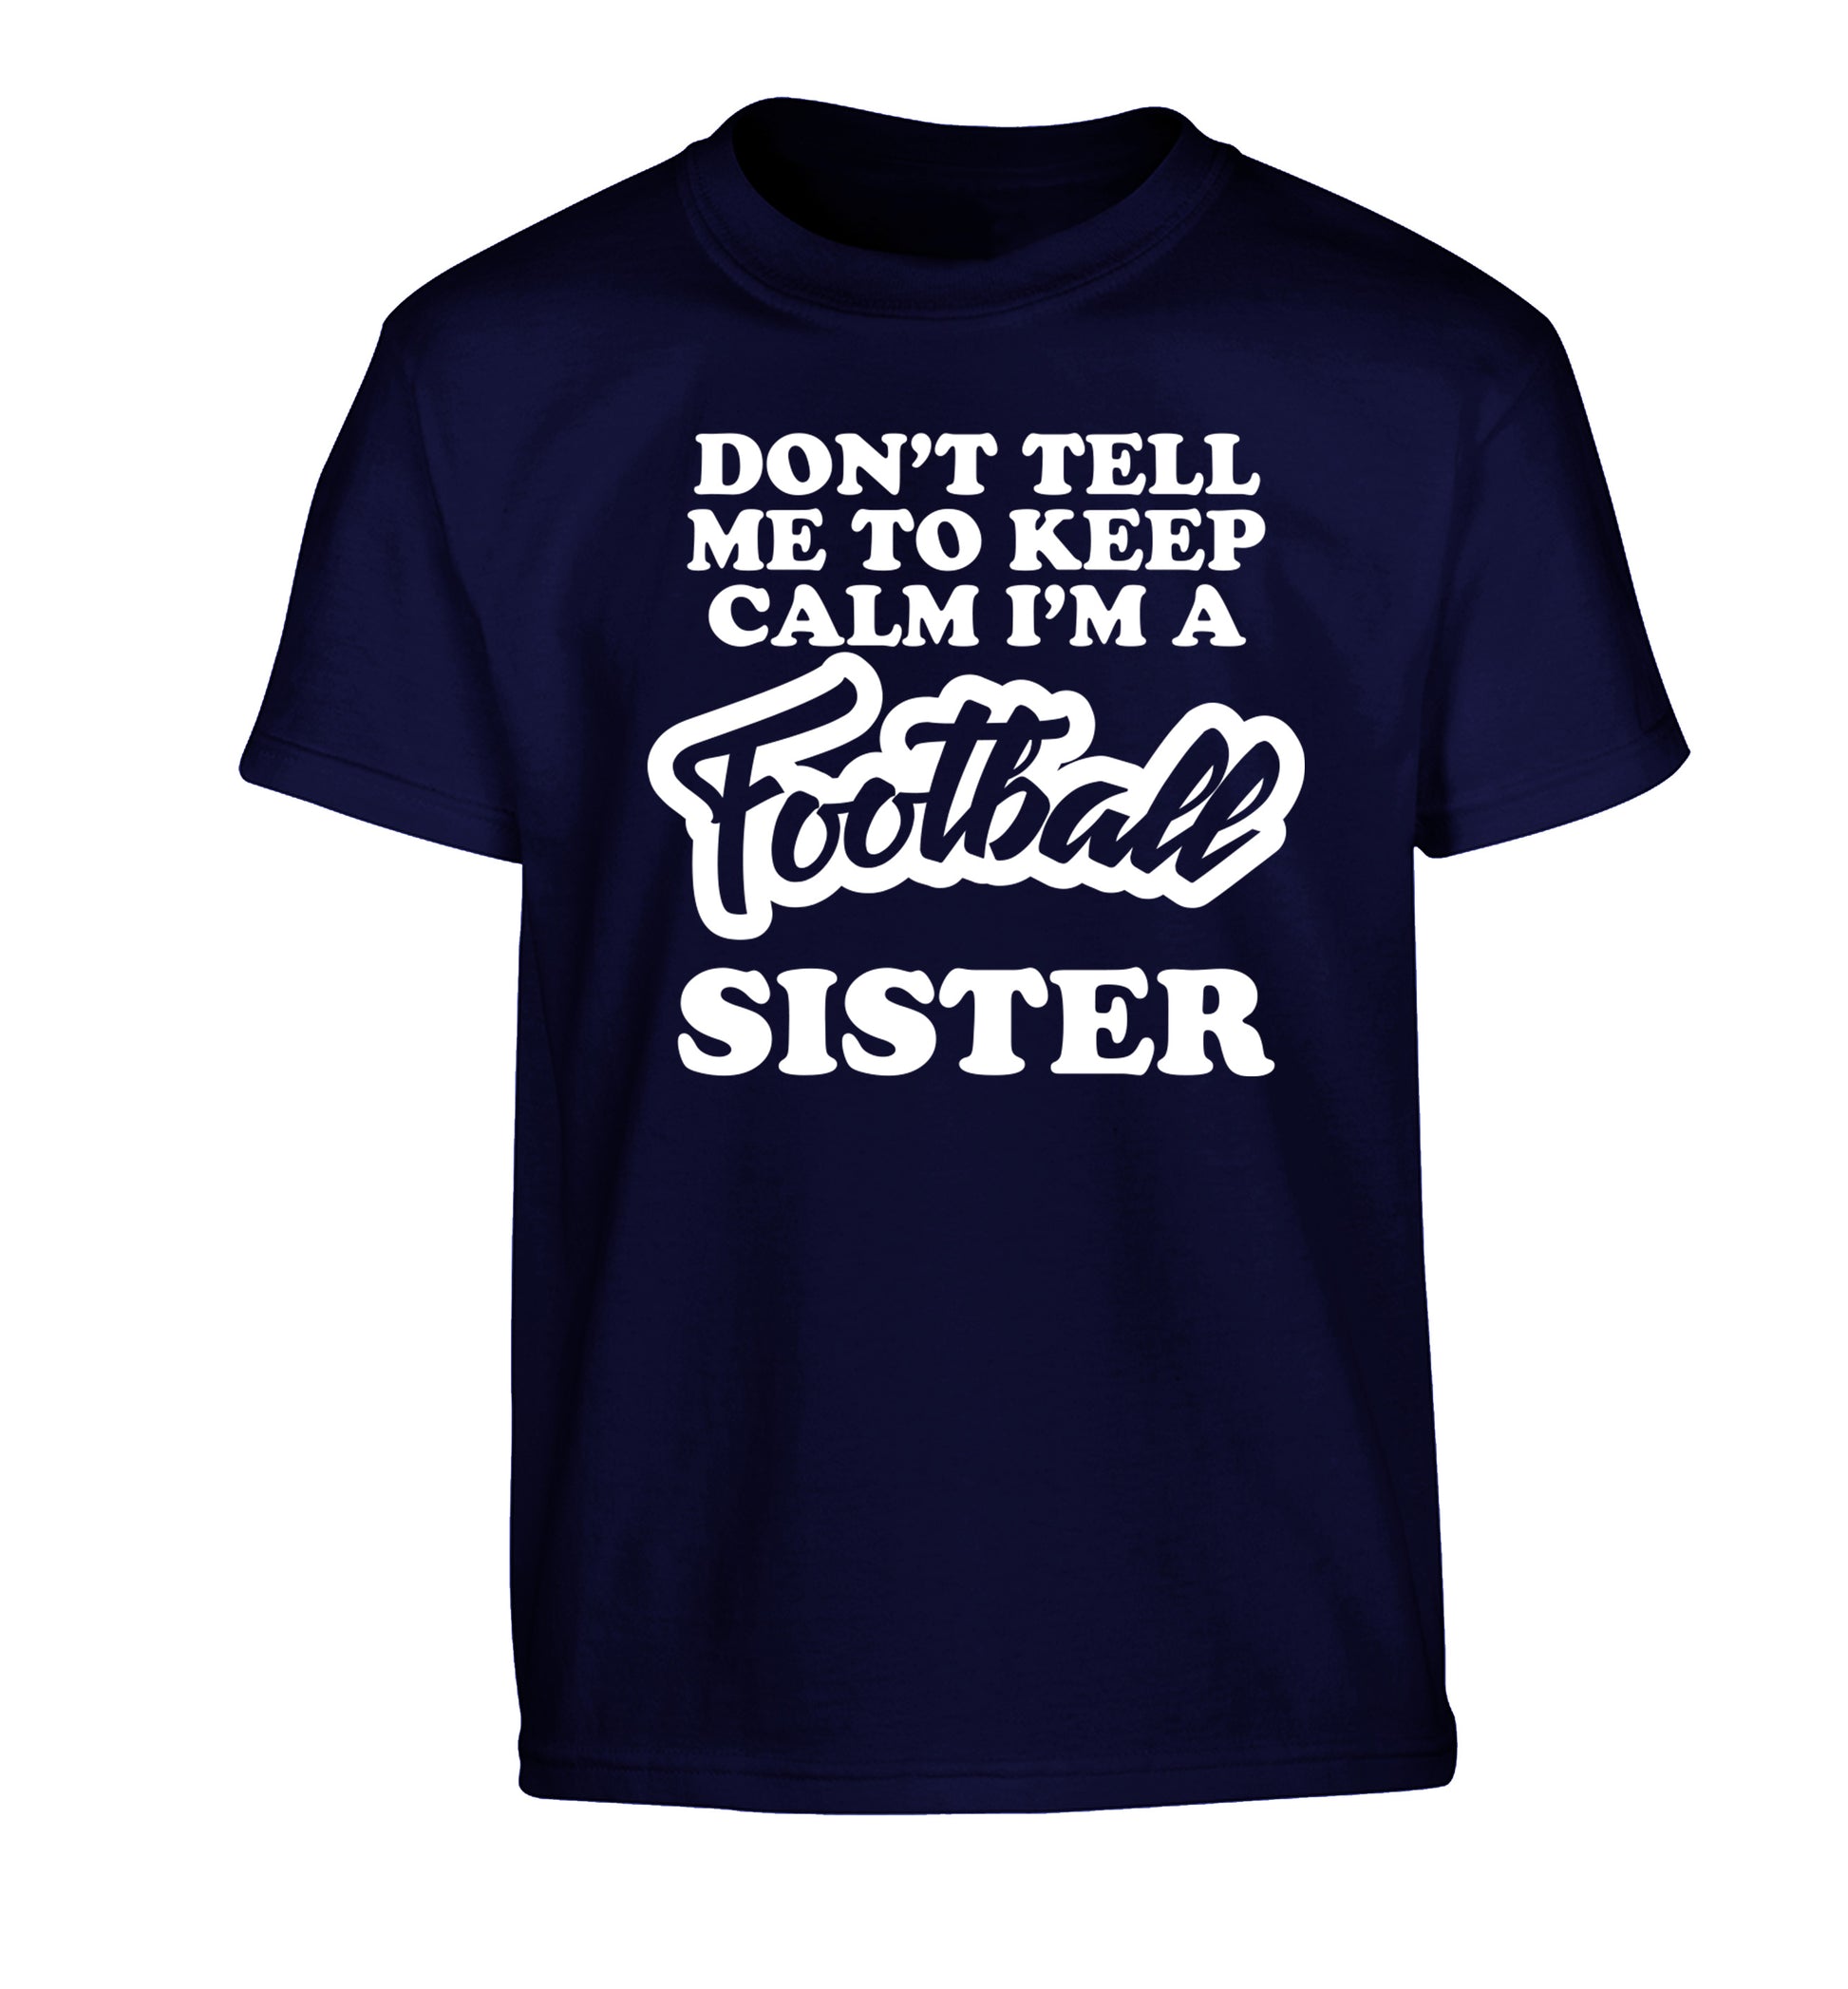 Don't tell me to keep calm I'm a football sister Children's navy Tshirt 12-14 Years